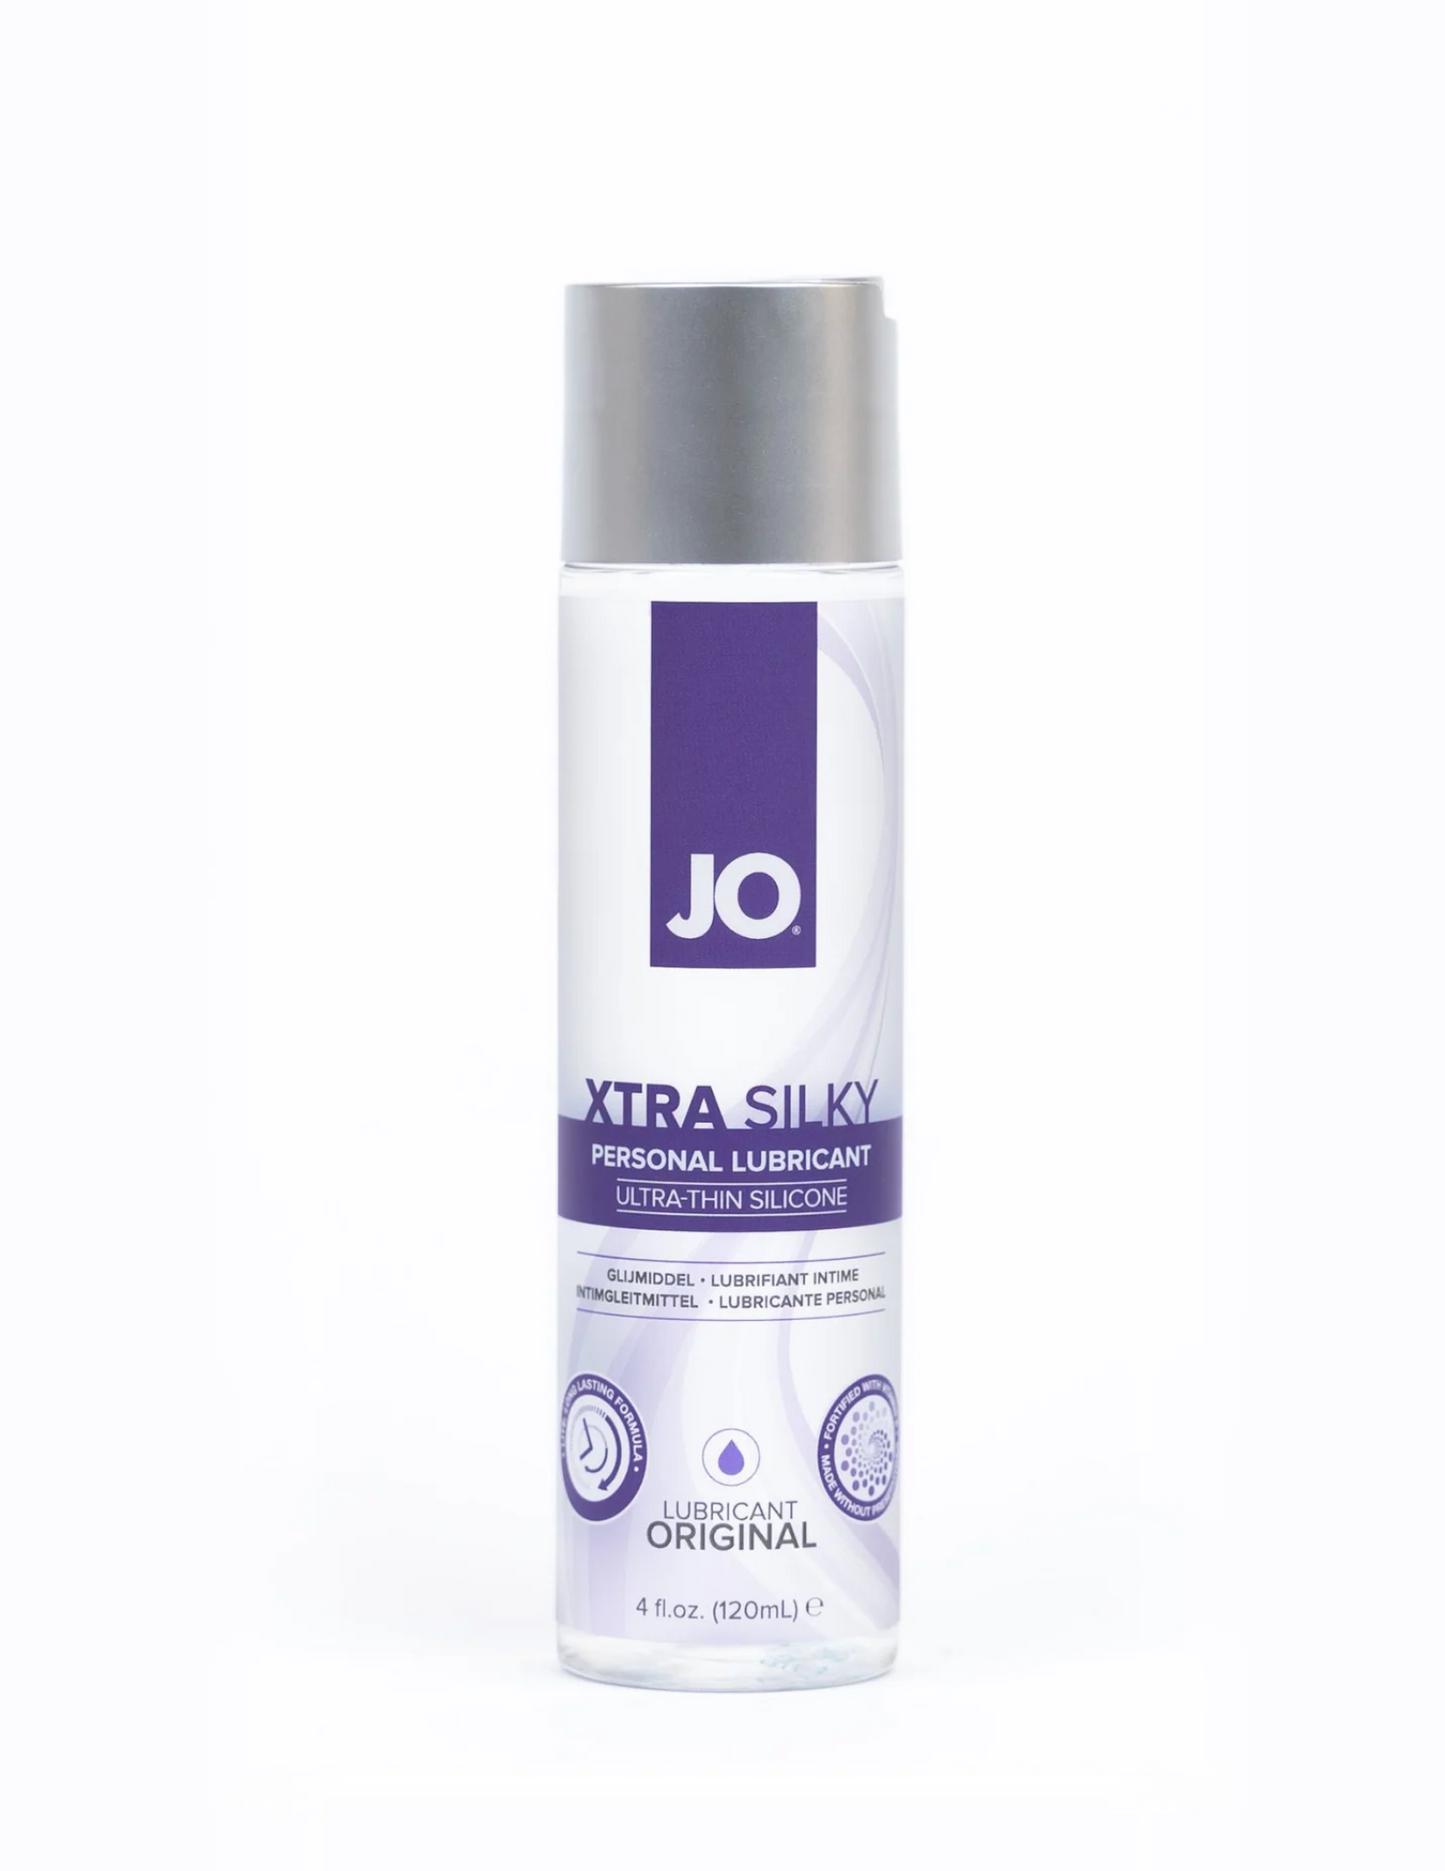 Photo of the front of the bottle of JO Xtra Silky Thin Silicone Lubricant, 4oz.